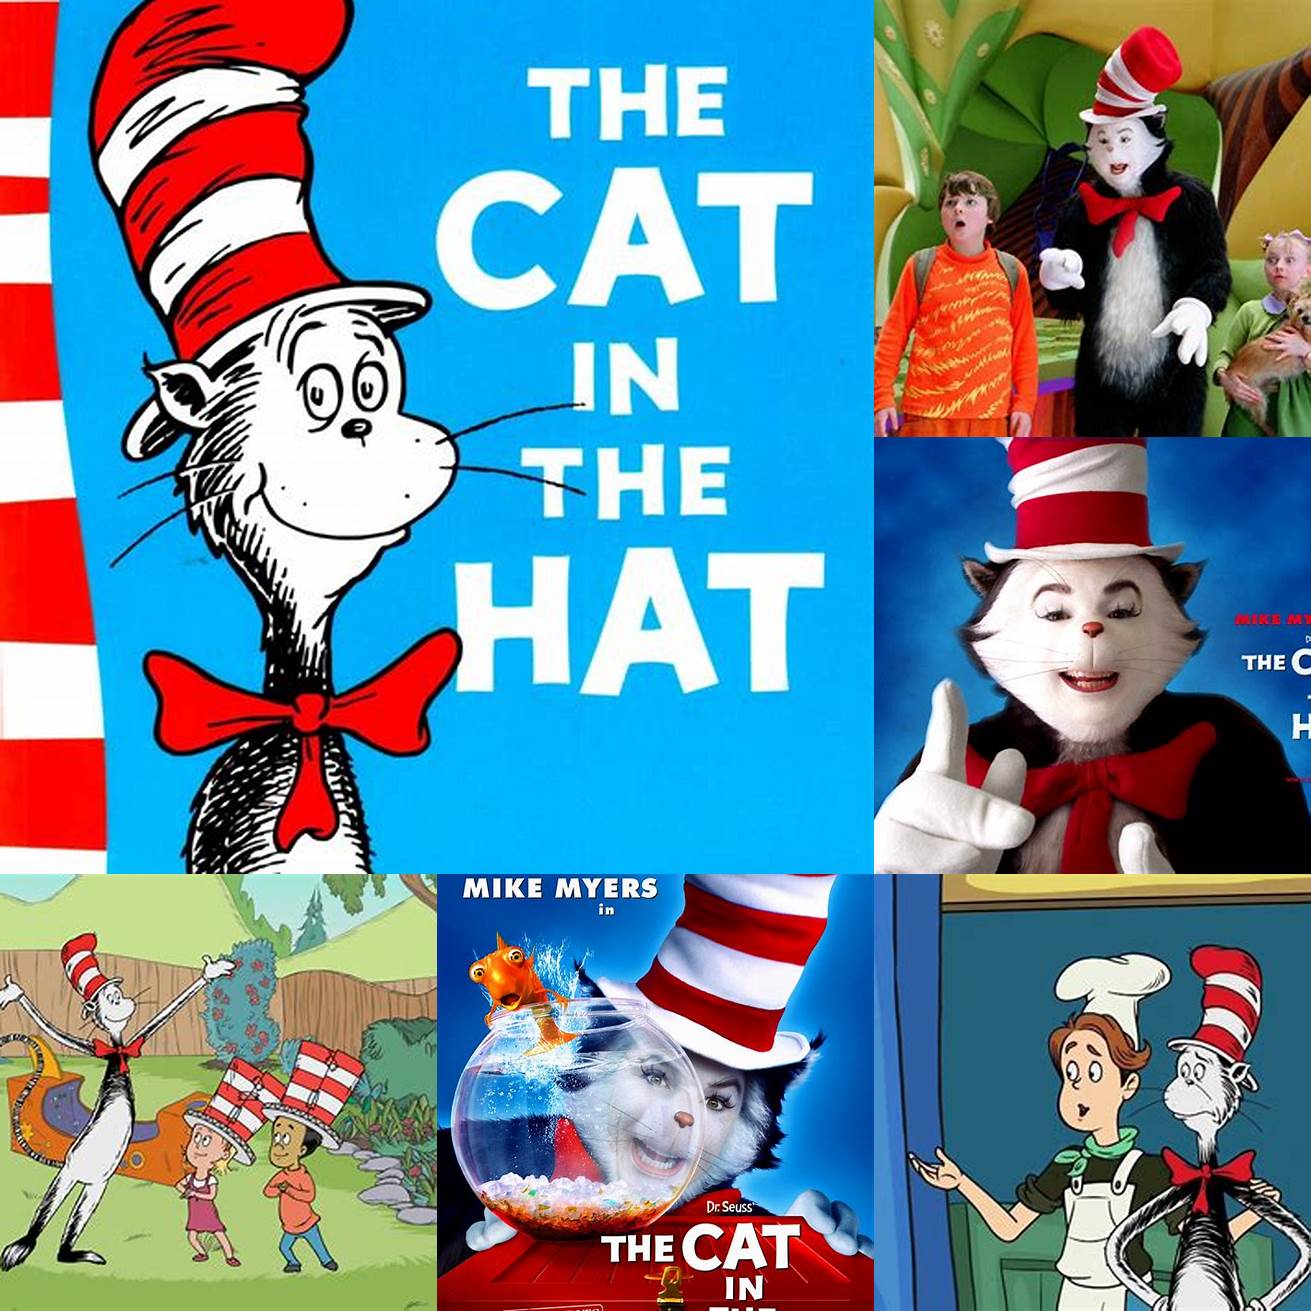 Their friendship with the Cat in the Hat